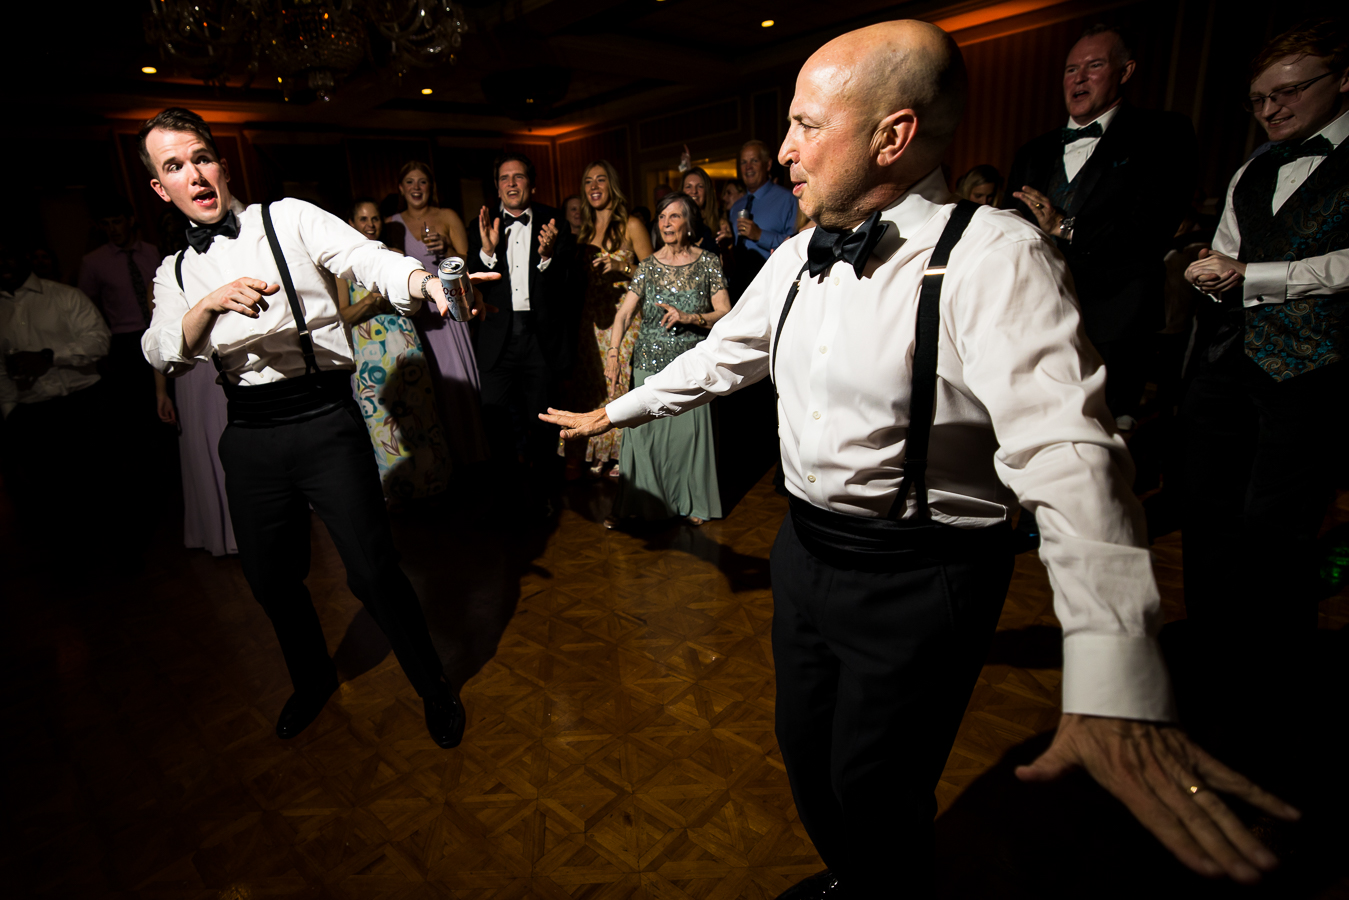 image of the groom and his dad dancing together on the dance floor